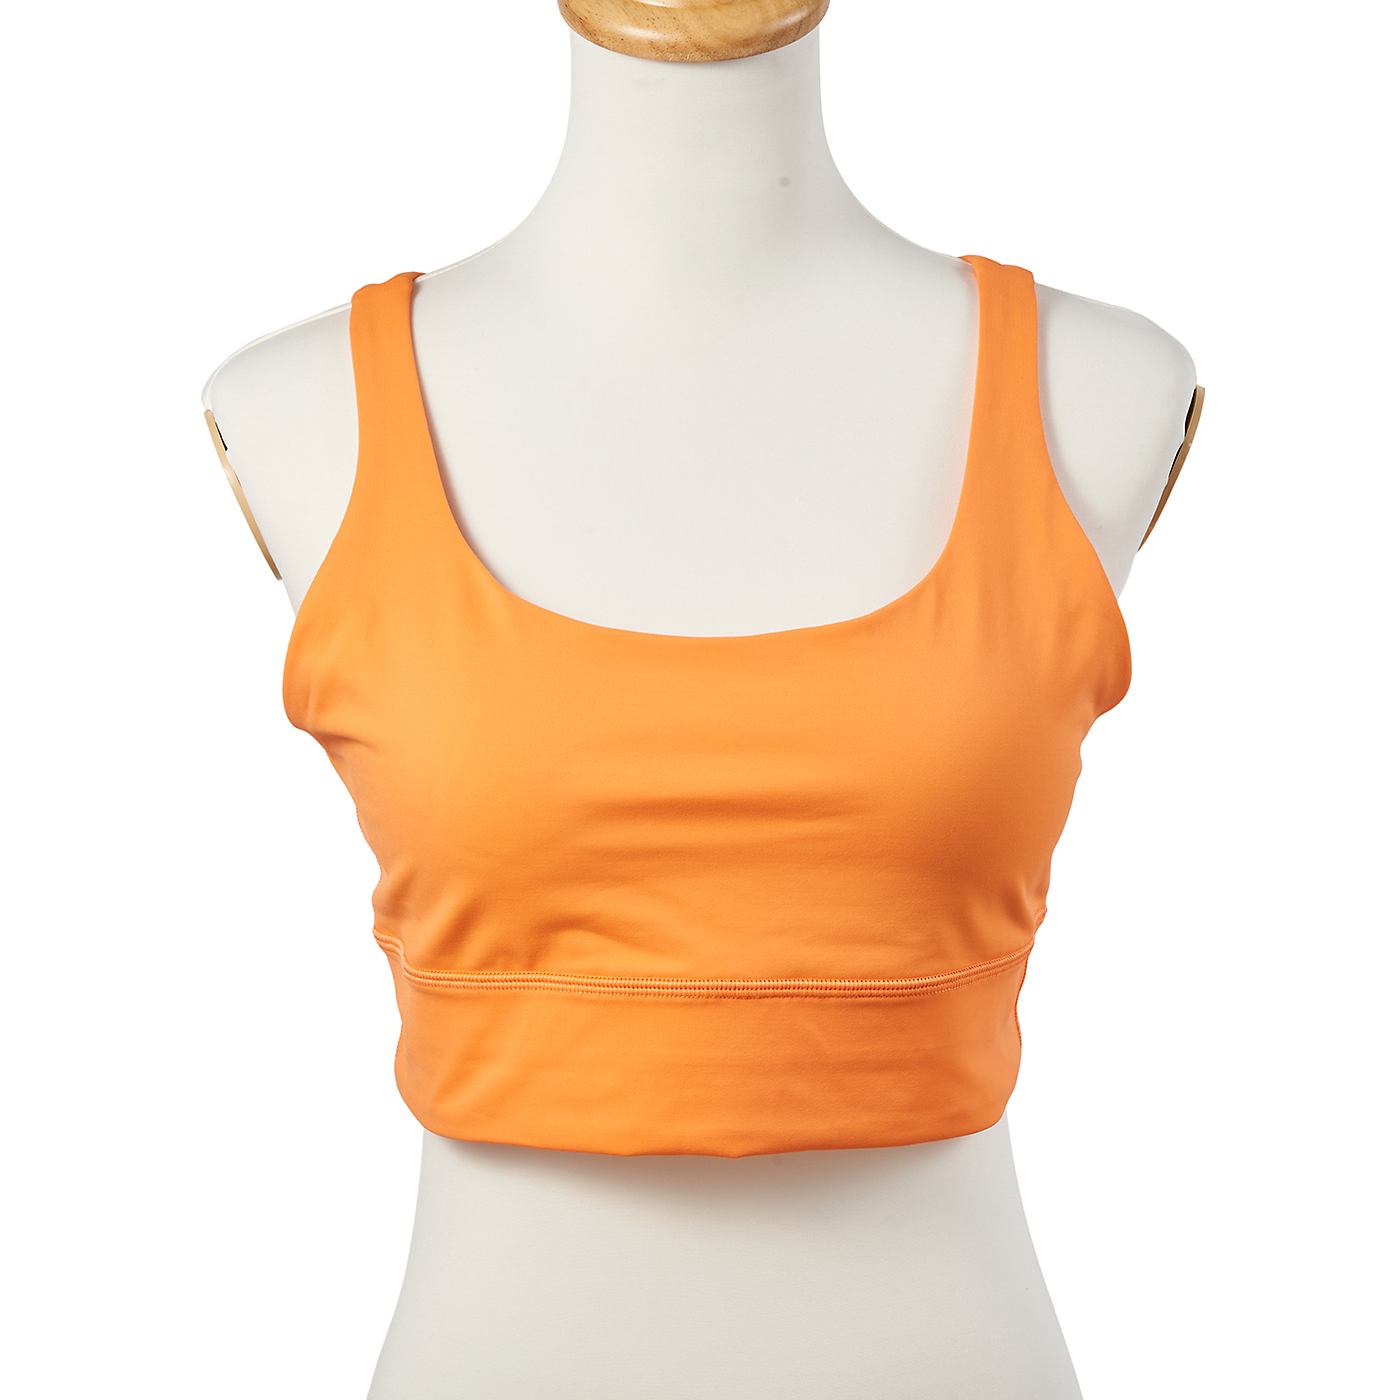 lululemon☆スポーツブラ☆ Everlux Front Cut-Out Train Bra